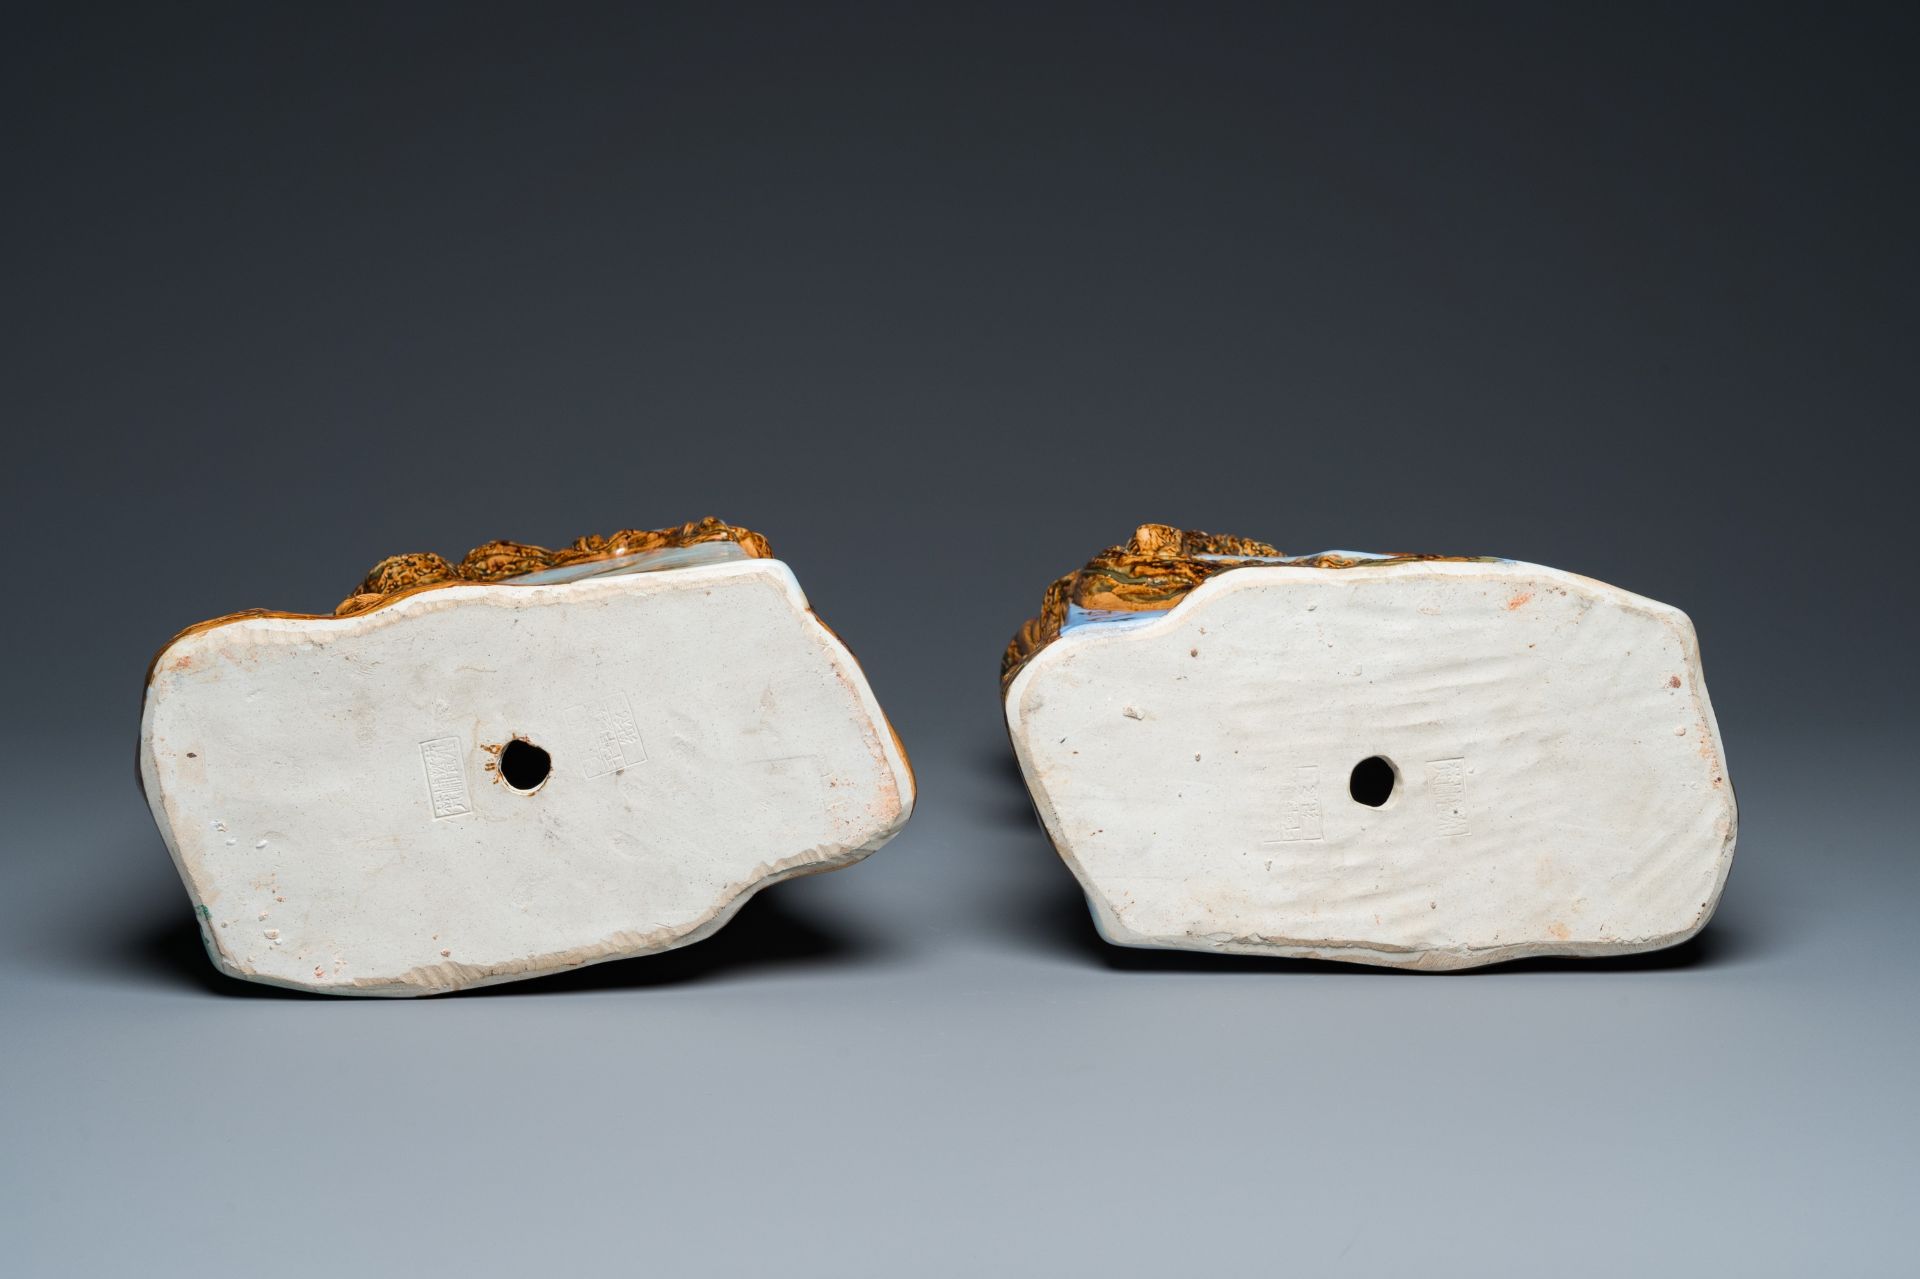 Two Chinese decorative faux bois ornaments, '1200 Years Jingdezheng', dated 2004 - Image 7 of 7